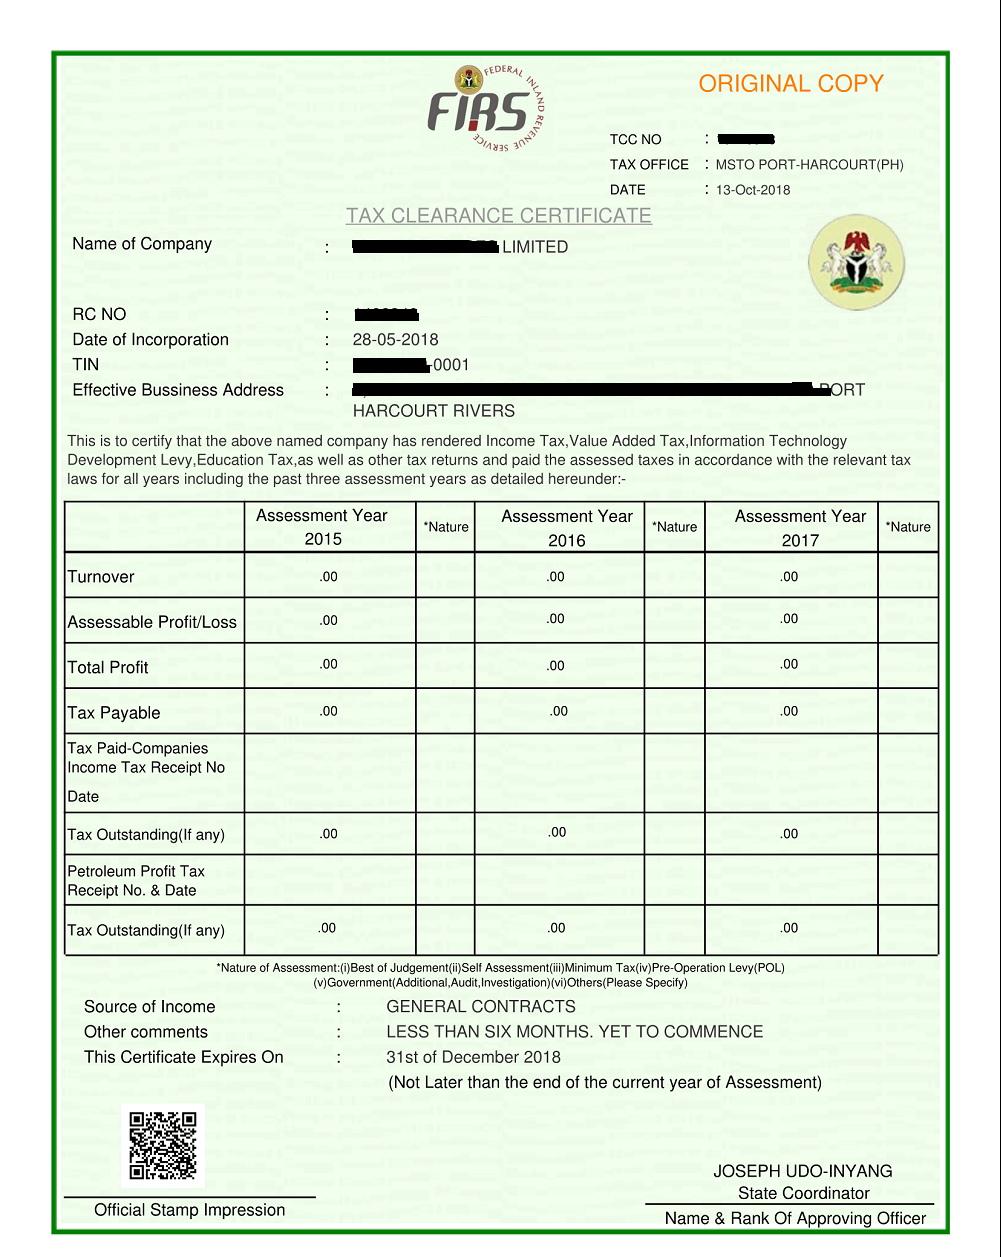 Application For Tax Clearance Certificate Sample : Tax Clearance